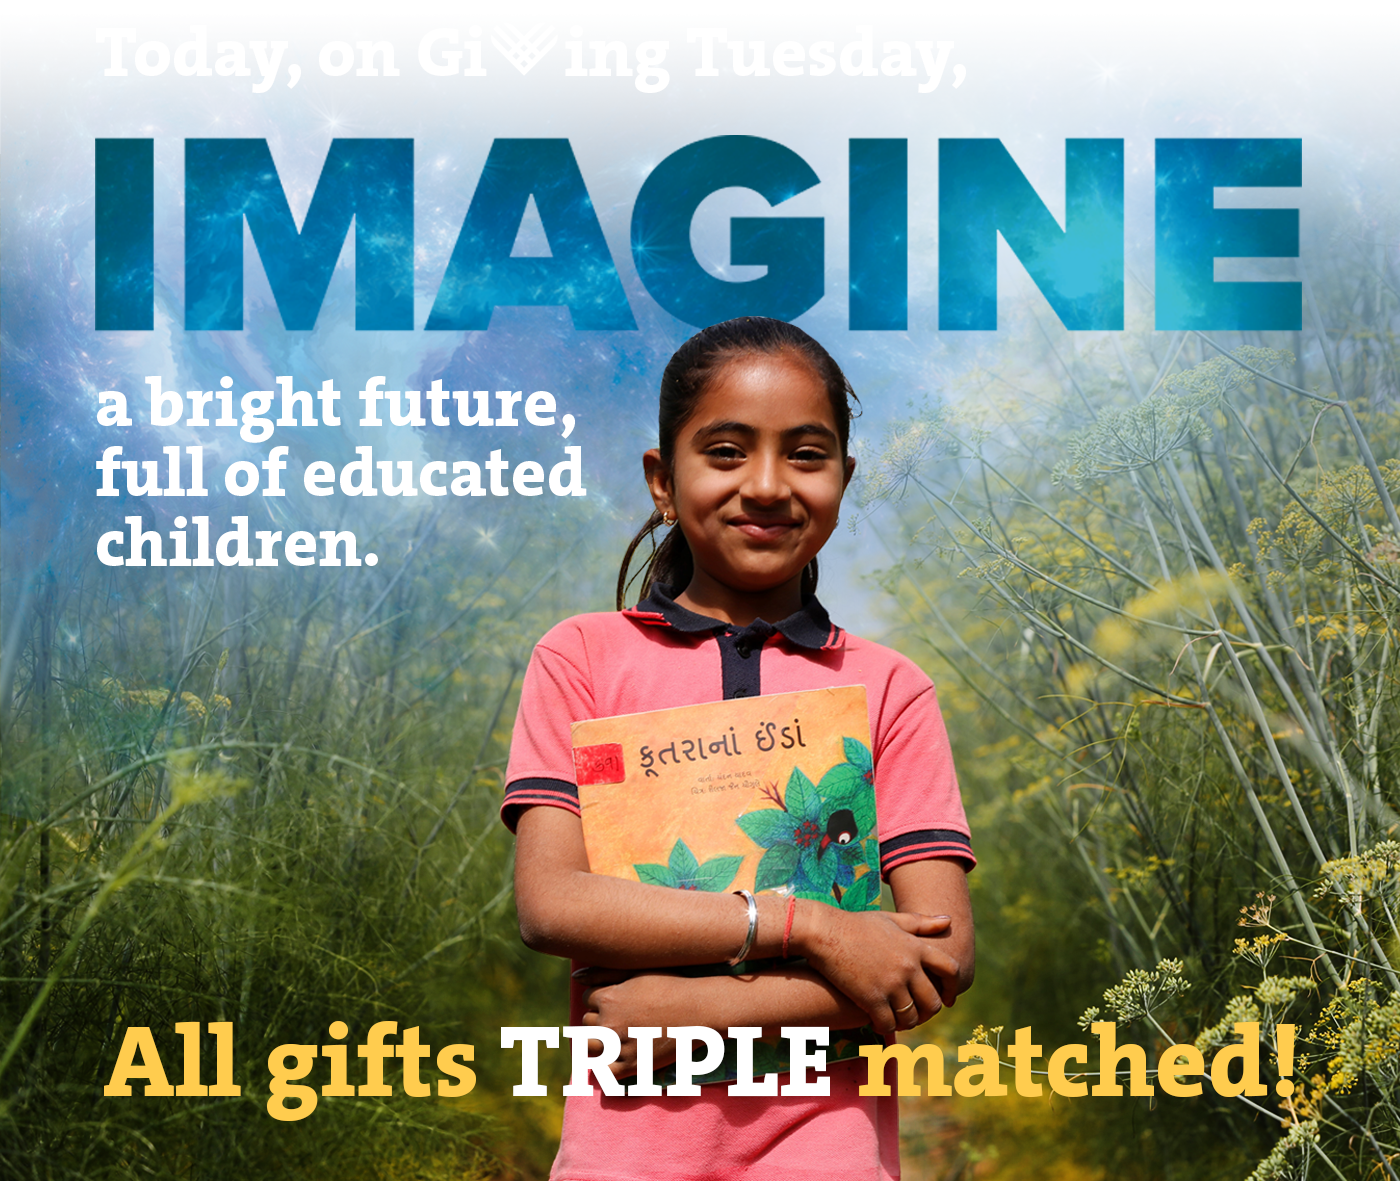 Today, on Giving Tuesday, IMAGINE a bright future, full of educated children. All gifts TRIPLE matched!